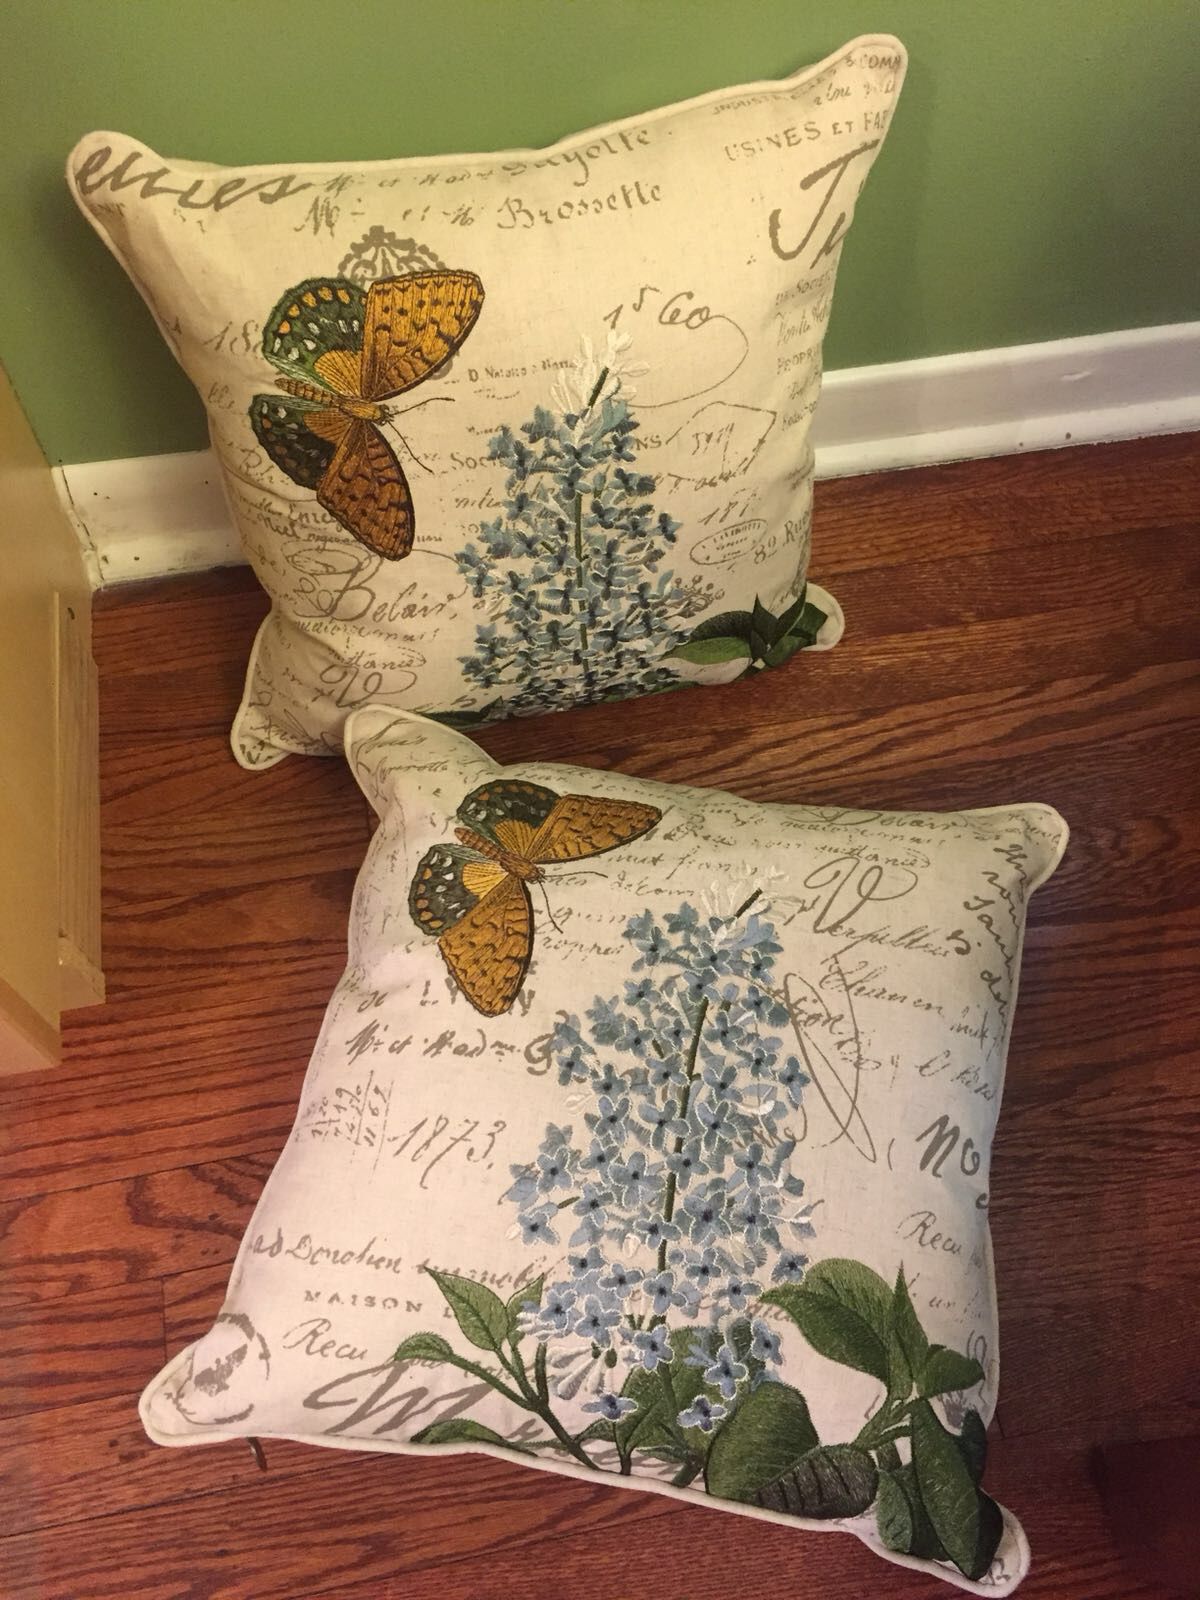 SET OF 2 BRAND NEW DECORATIVE PILLOWS FROM PIER 1